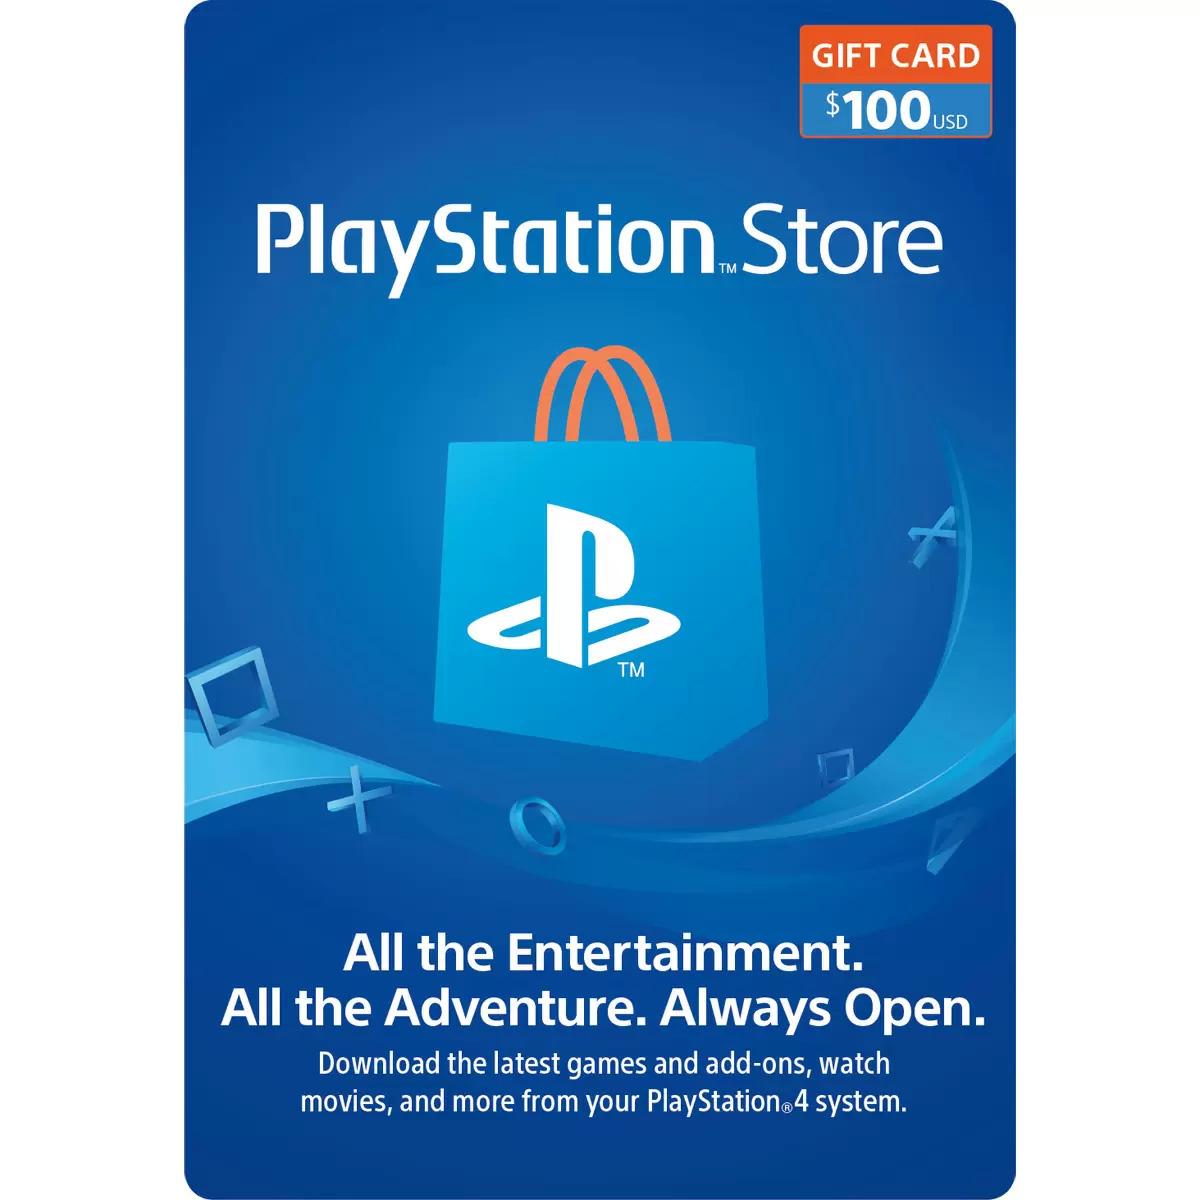 $100 PlayStation Network Gift Card for $85